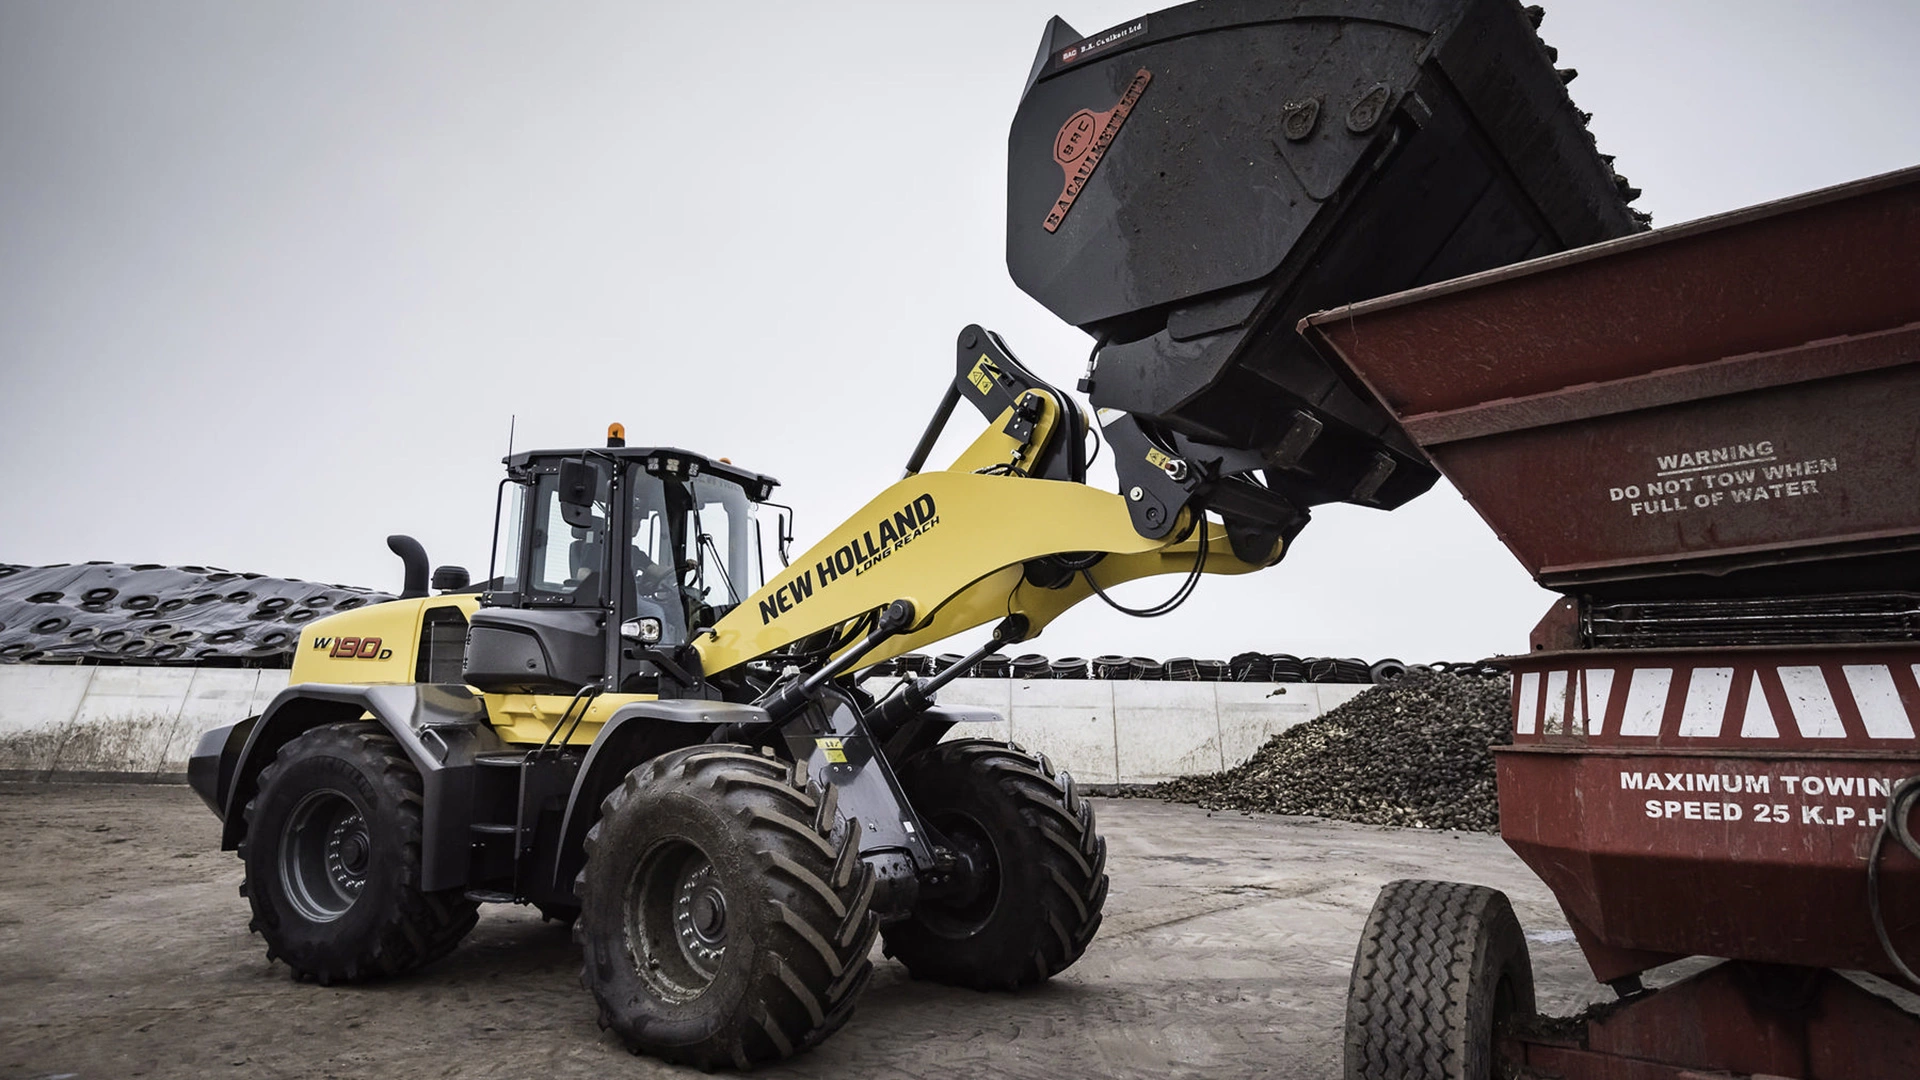 A robust New Holland W190D wheel loader in action, unloading gravel into a red dump trailer, set against an industrial backdrop.